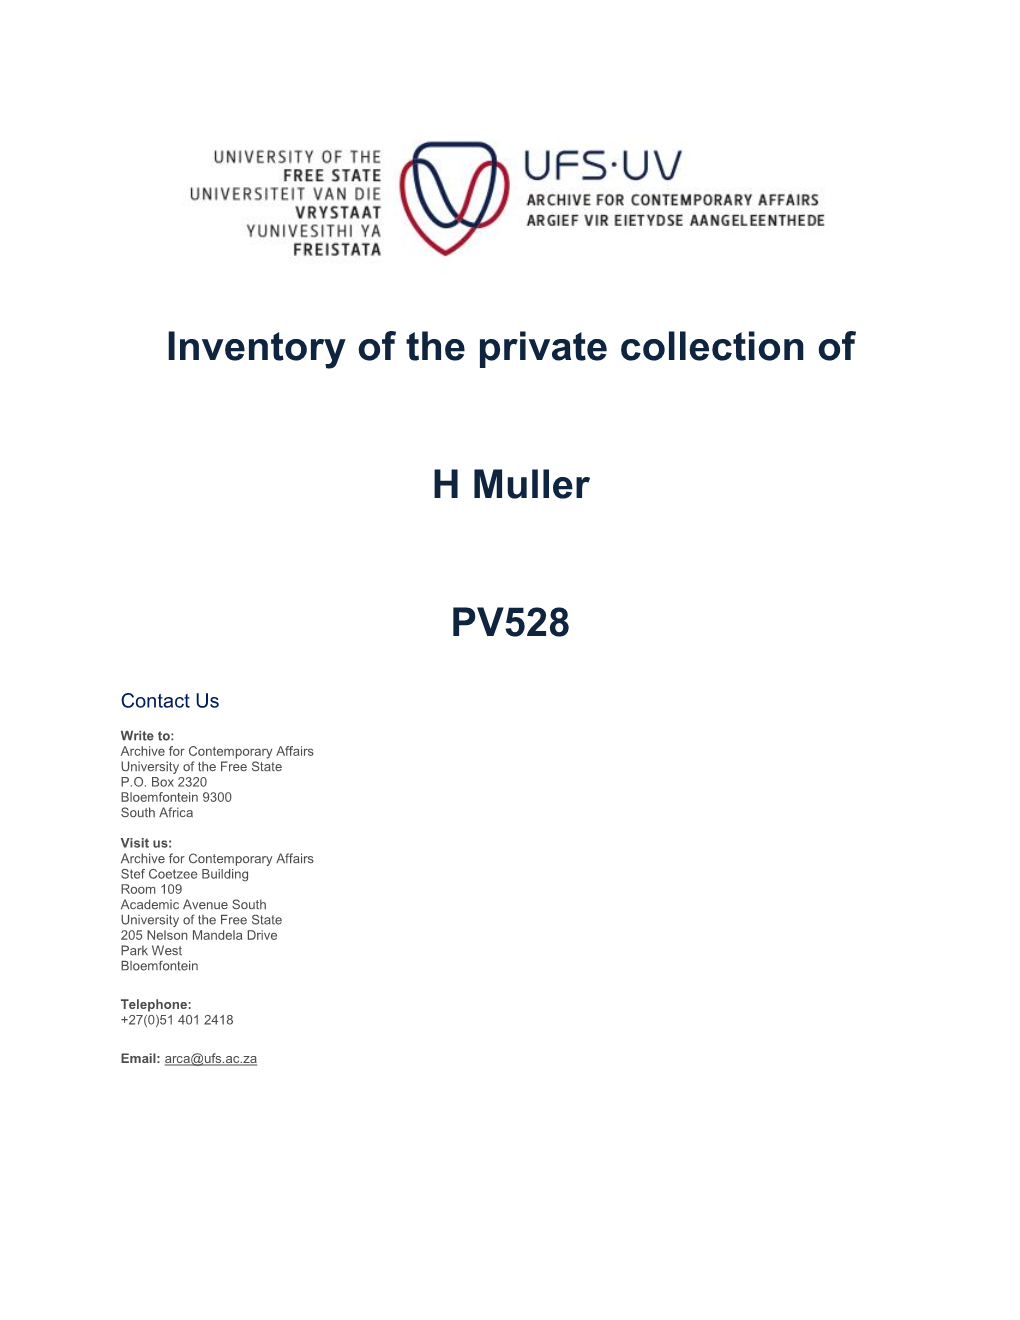 Inventory of the Private Collection of H Muller PV528